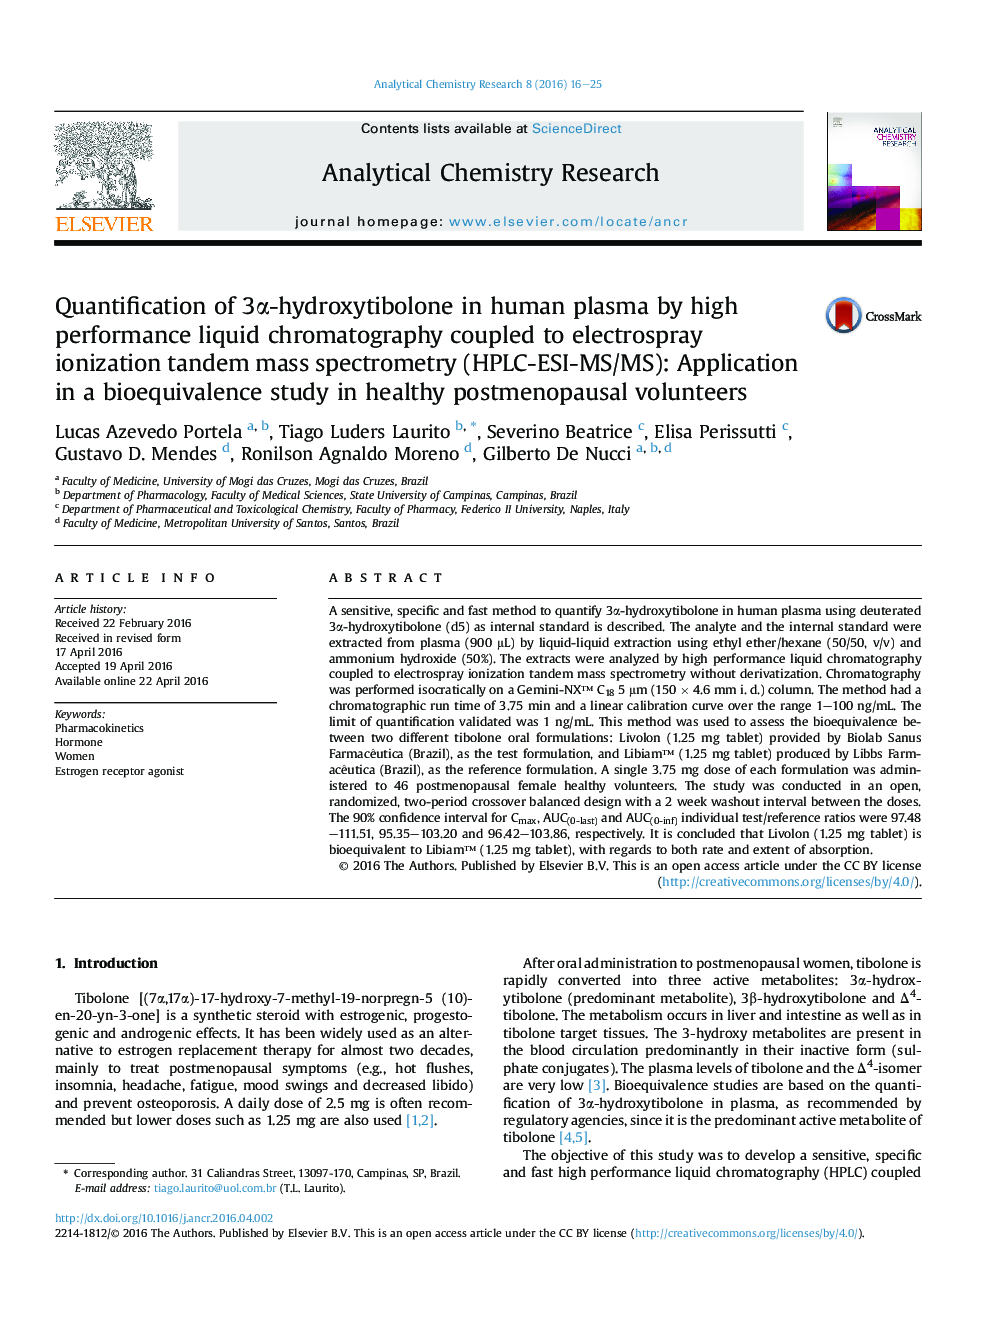 Quantification of 3α-hydroxytibolone in human plasma by high performance liquid chromatography coupled to electrospray ionization tandem mass spectrometry (HPLC-ESI-MS/MS): Application in a bioequivalence study in healthy postmenopausal volunteers